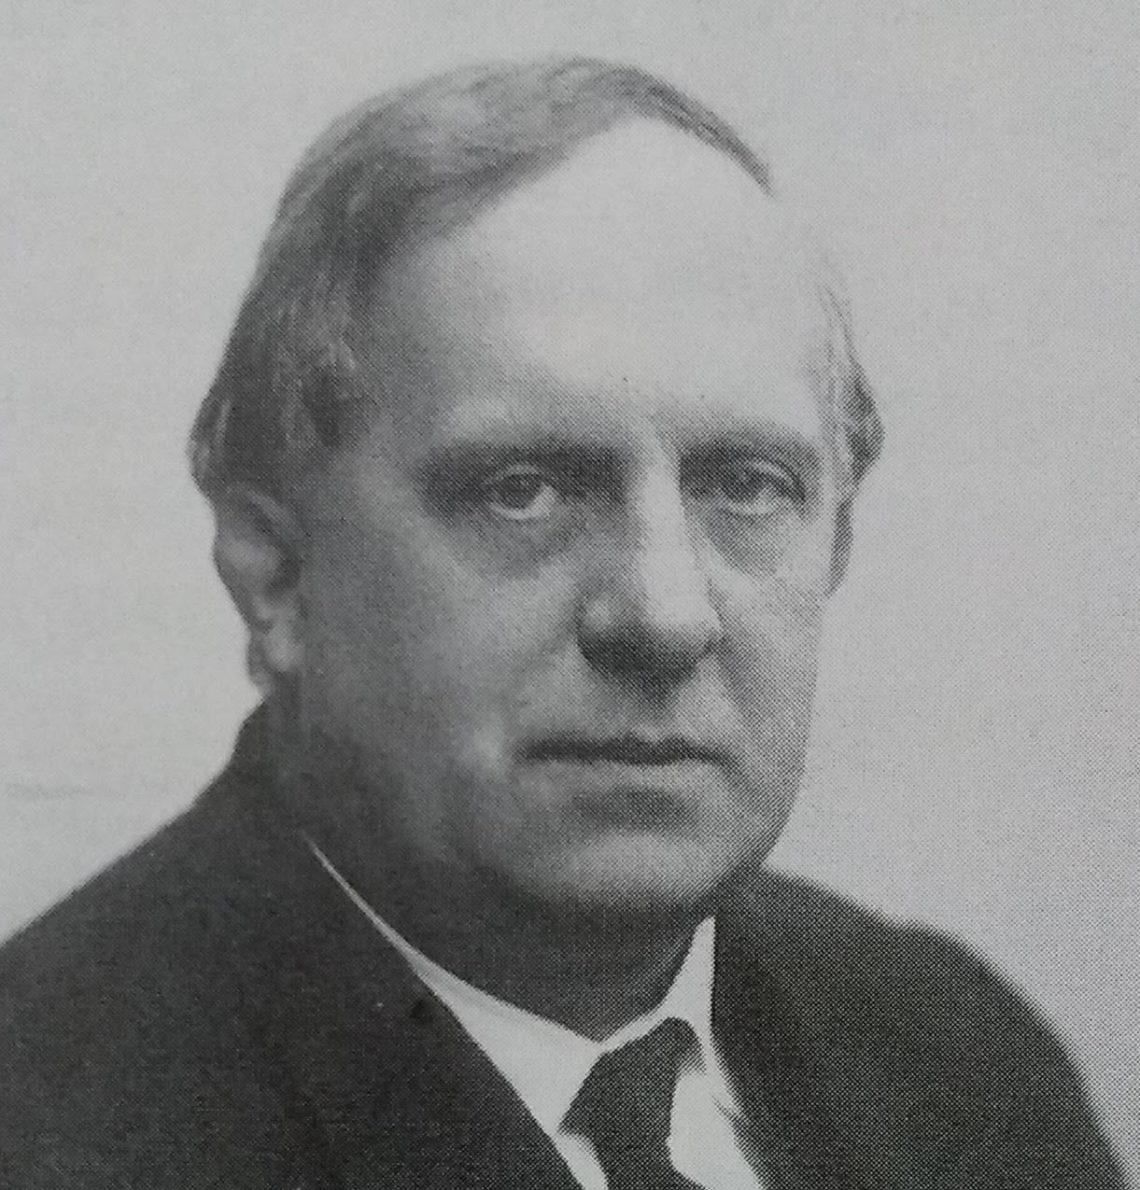 A black and white photo of Frederick Lanchester.